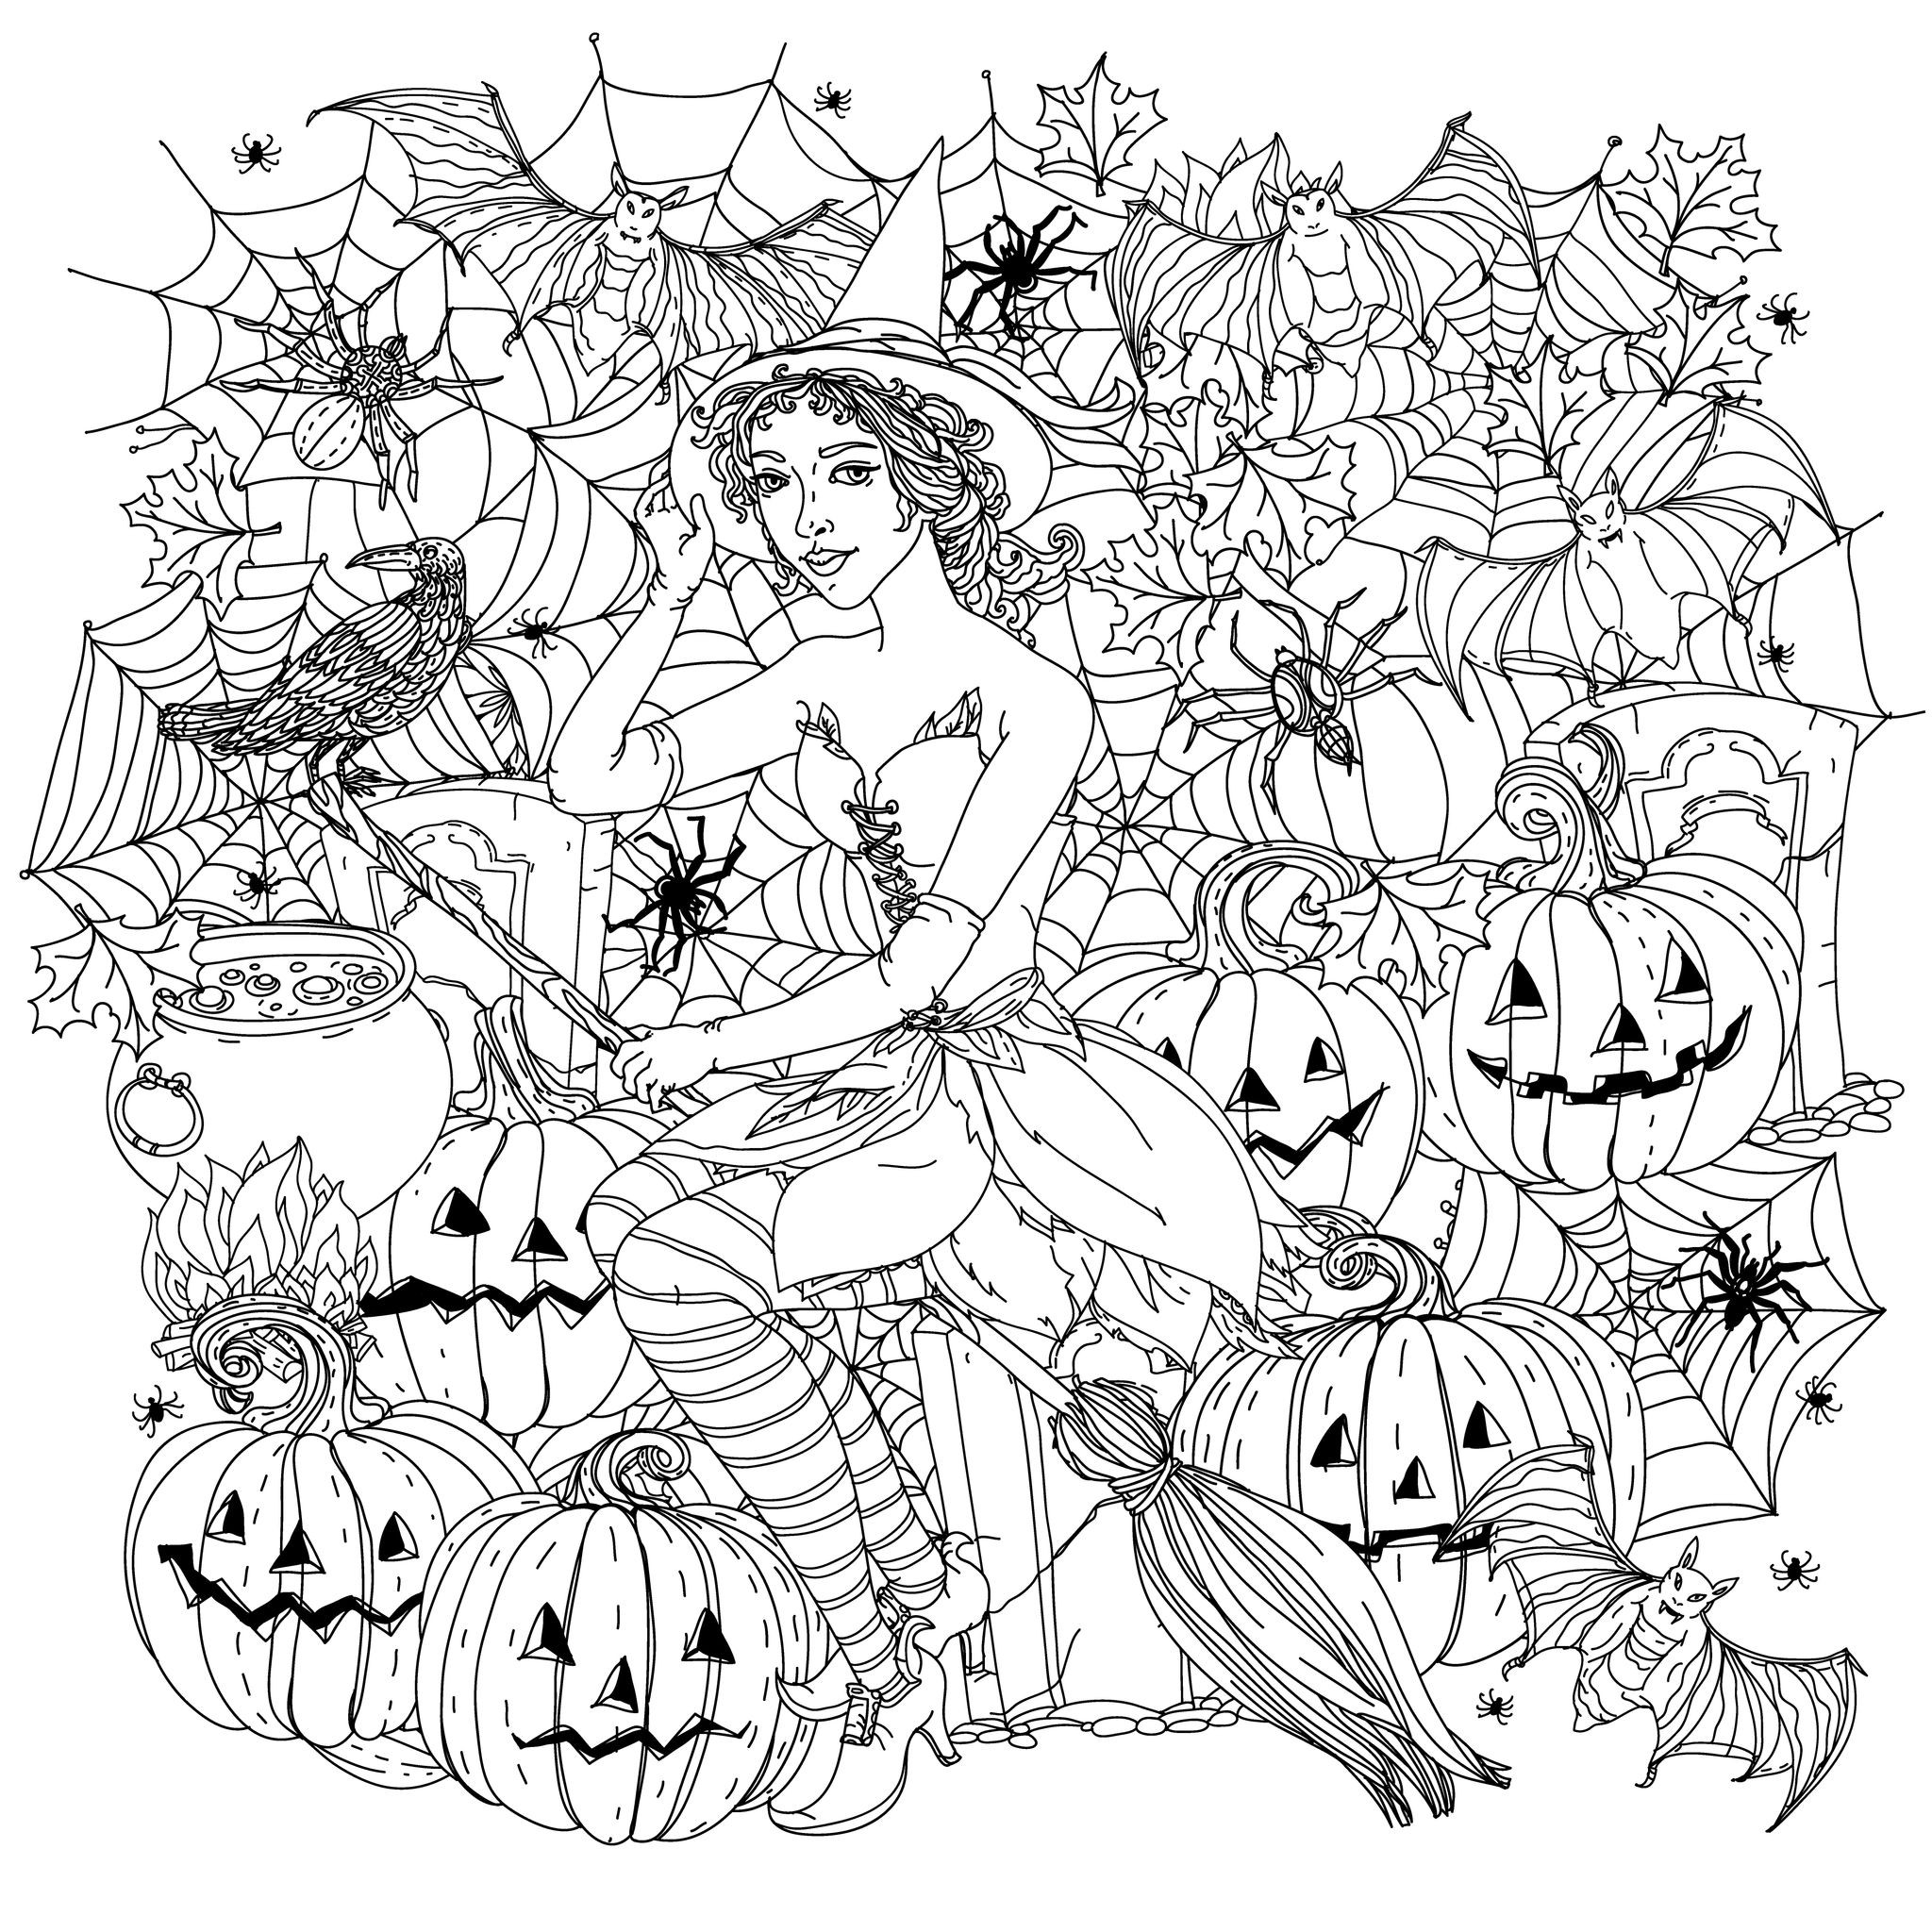 Adult Coloring Pages Halloween
 Halloween witch with pumpkins Halloween Adult Coloring Pages